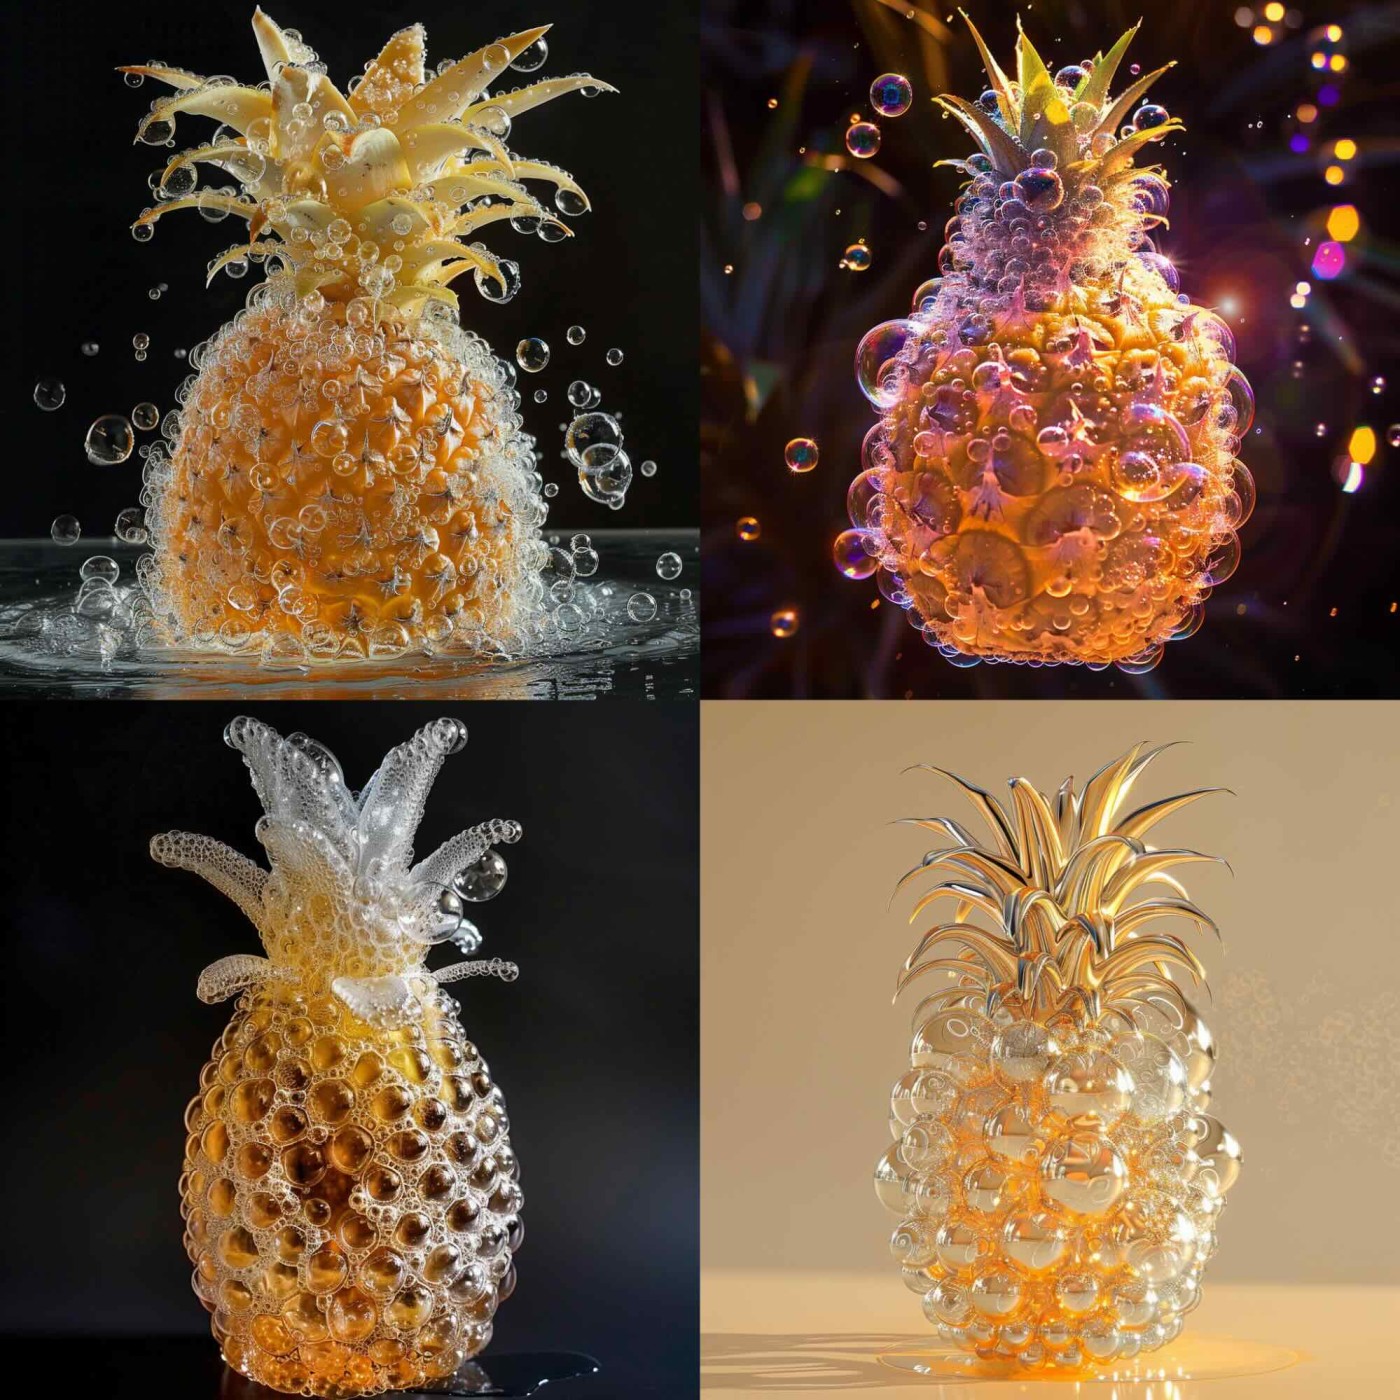 A pineapple made of bubbles